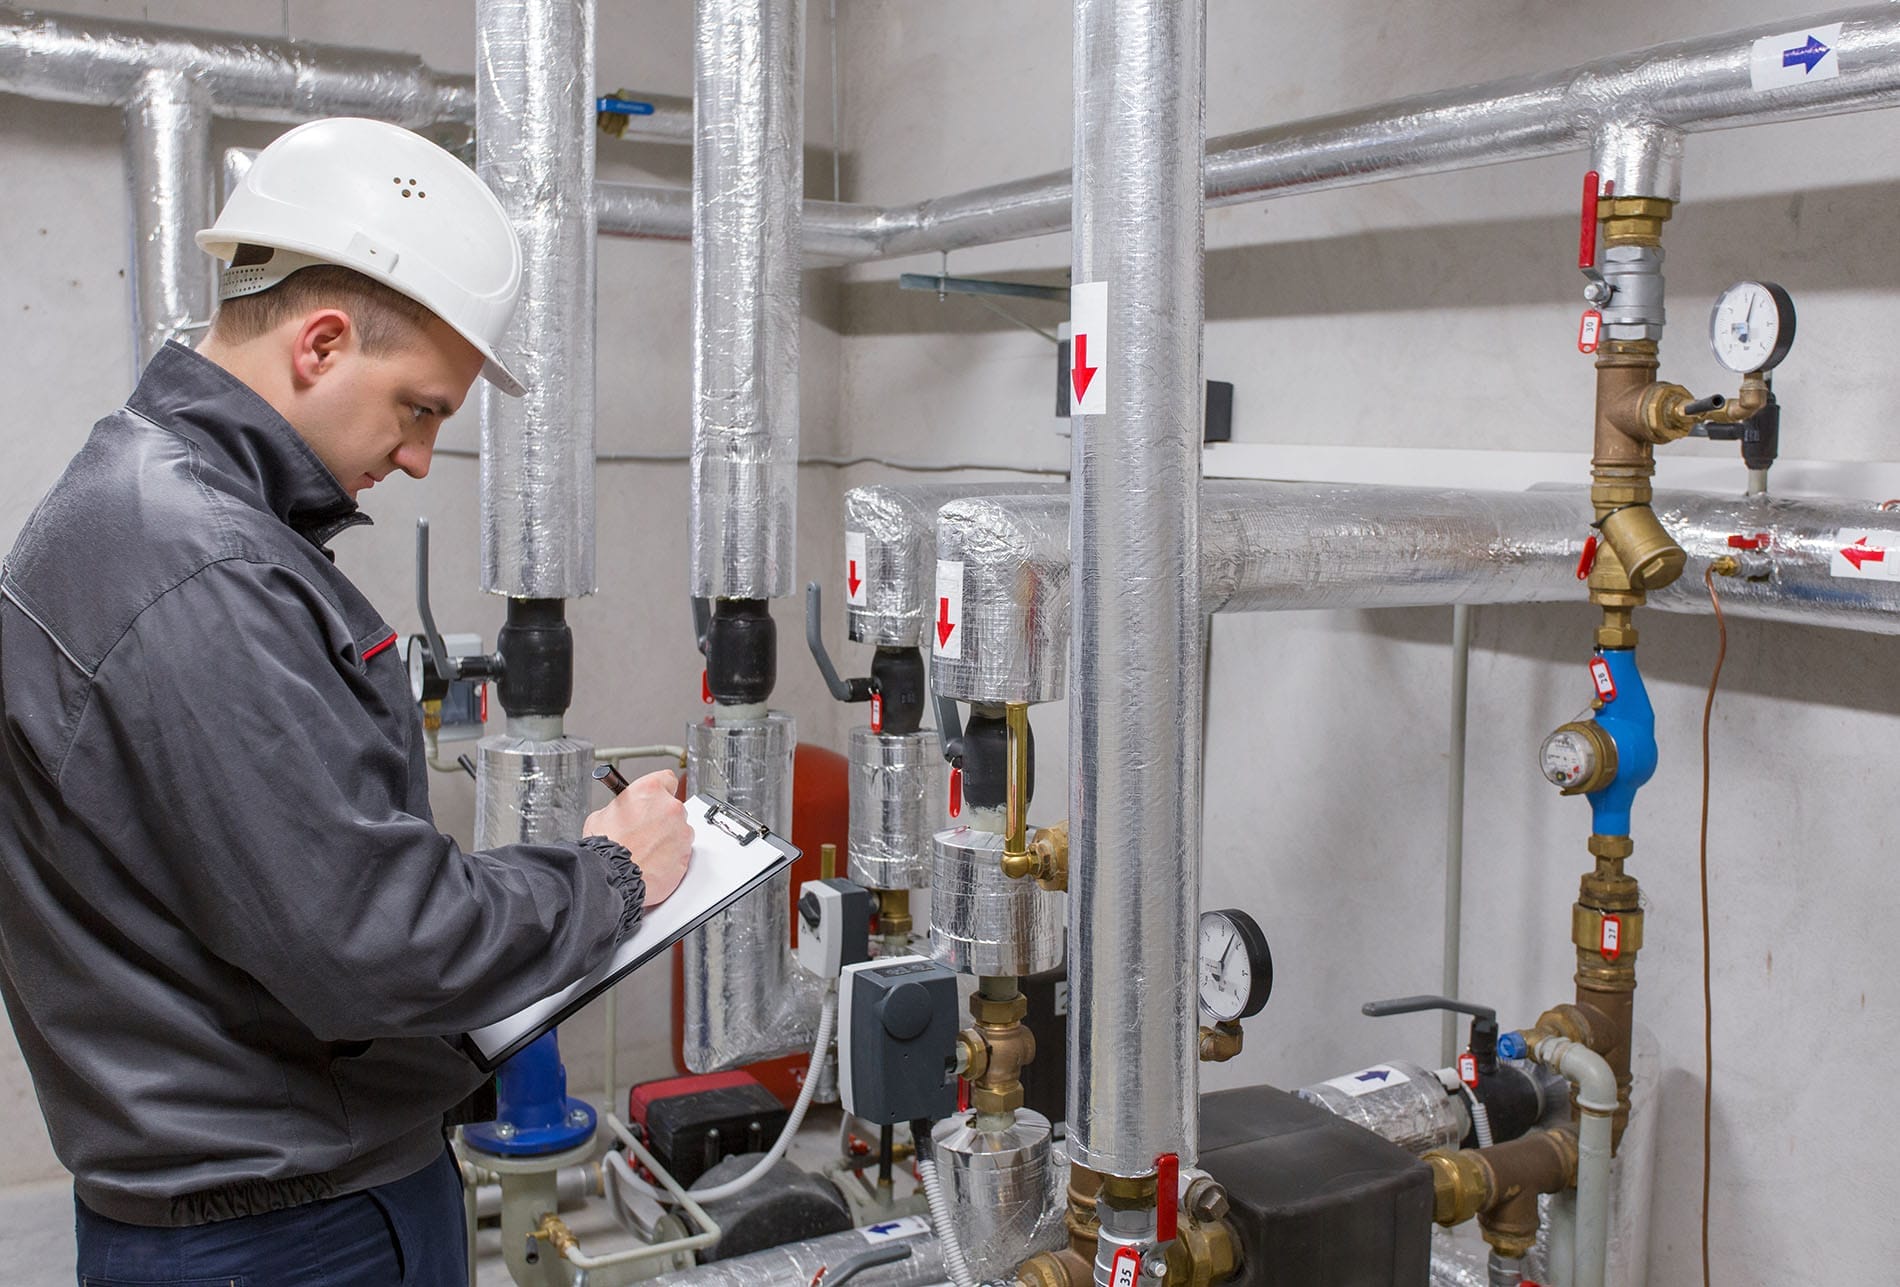 Energy Audit Technician Grades Electrical System